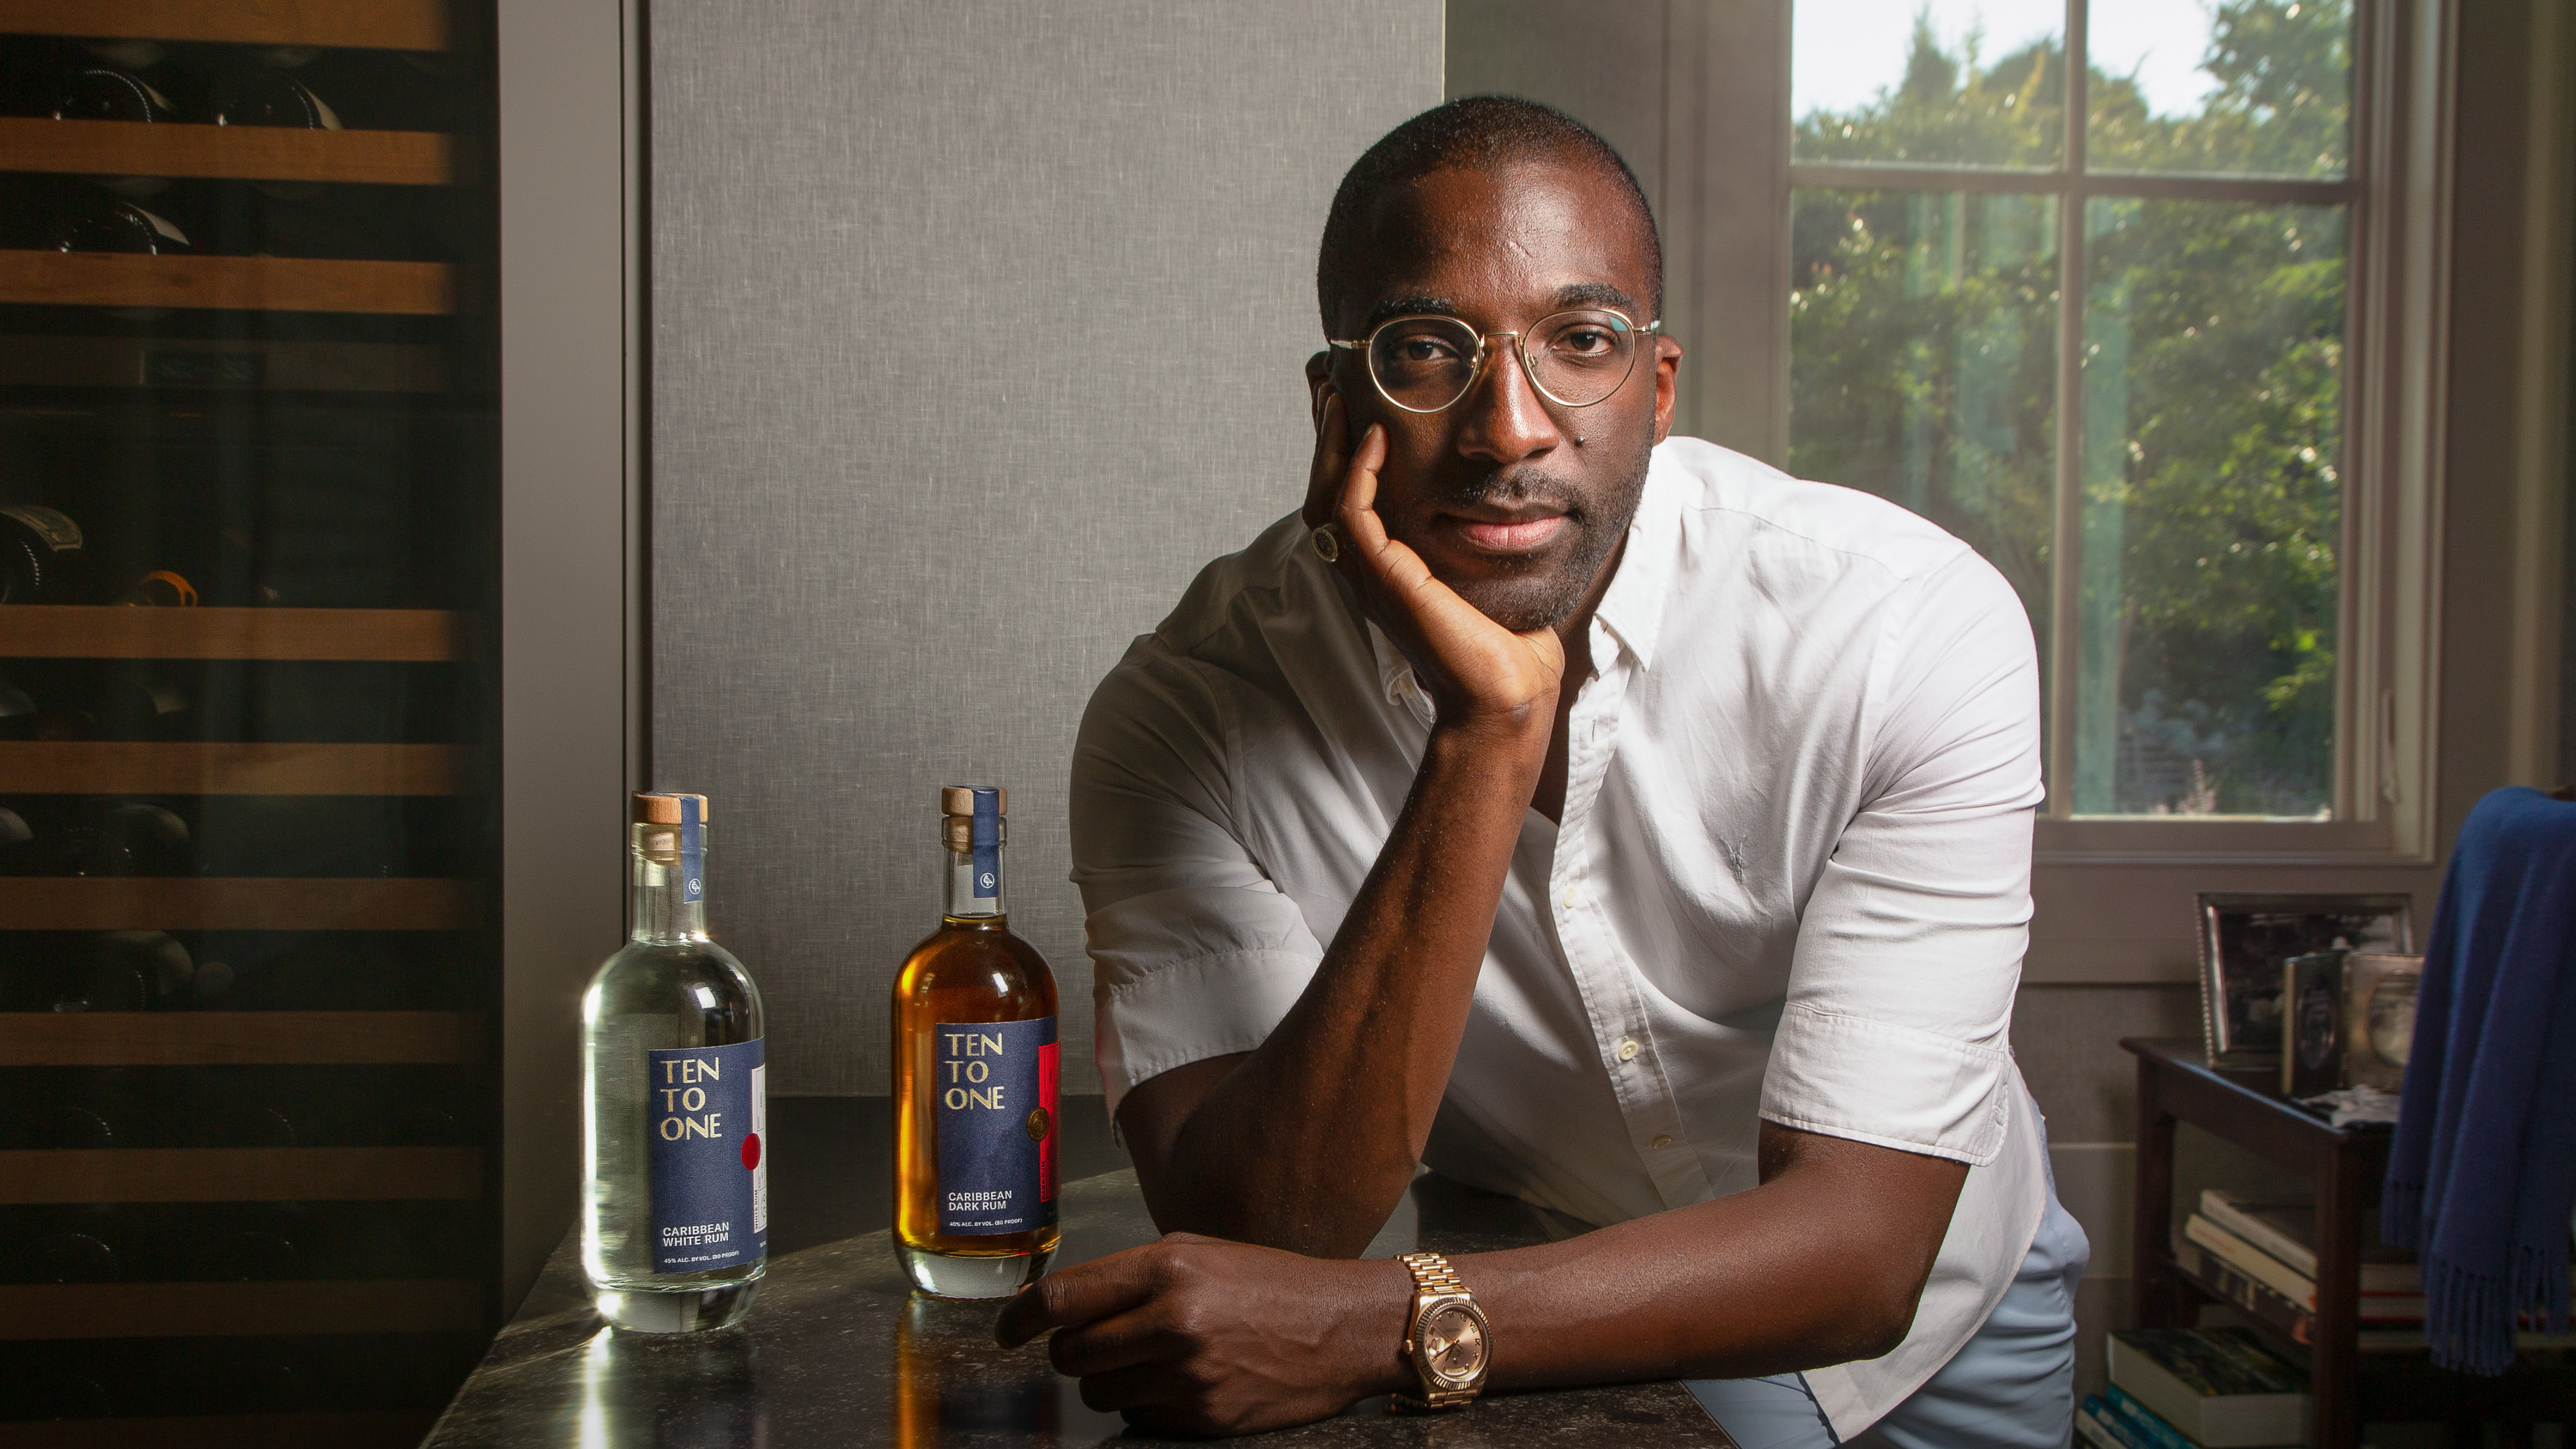 Marc Farrell portrait with bottles of his brand of rum